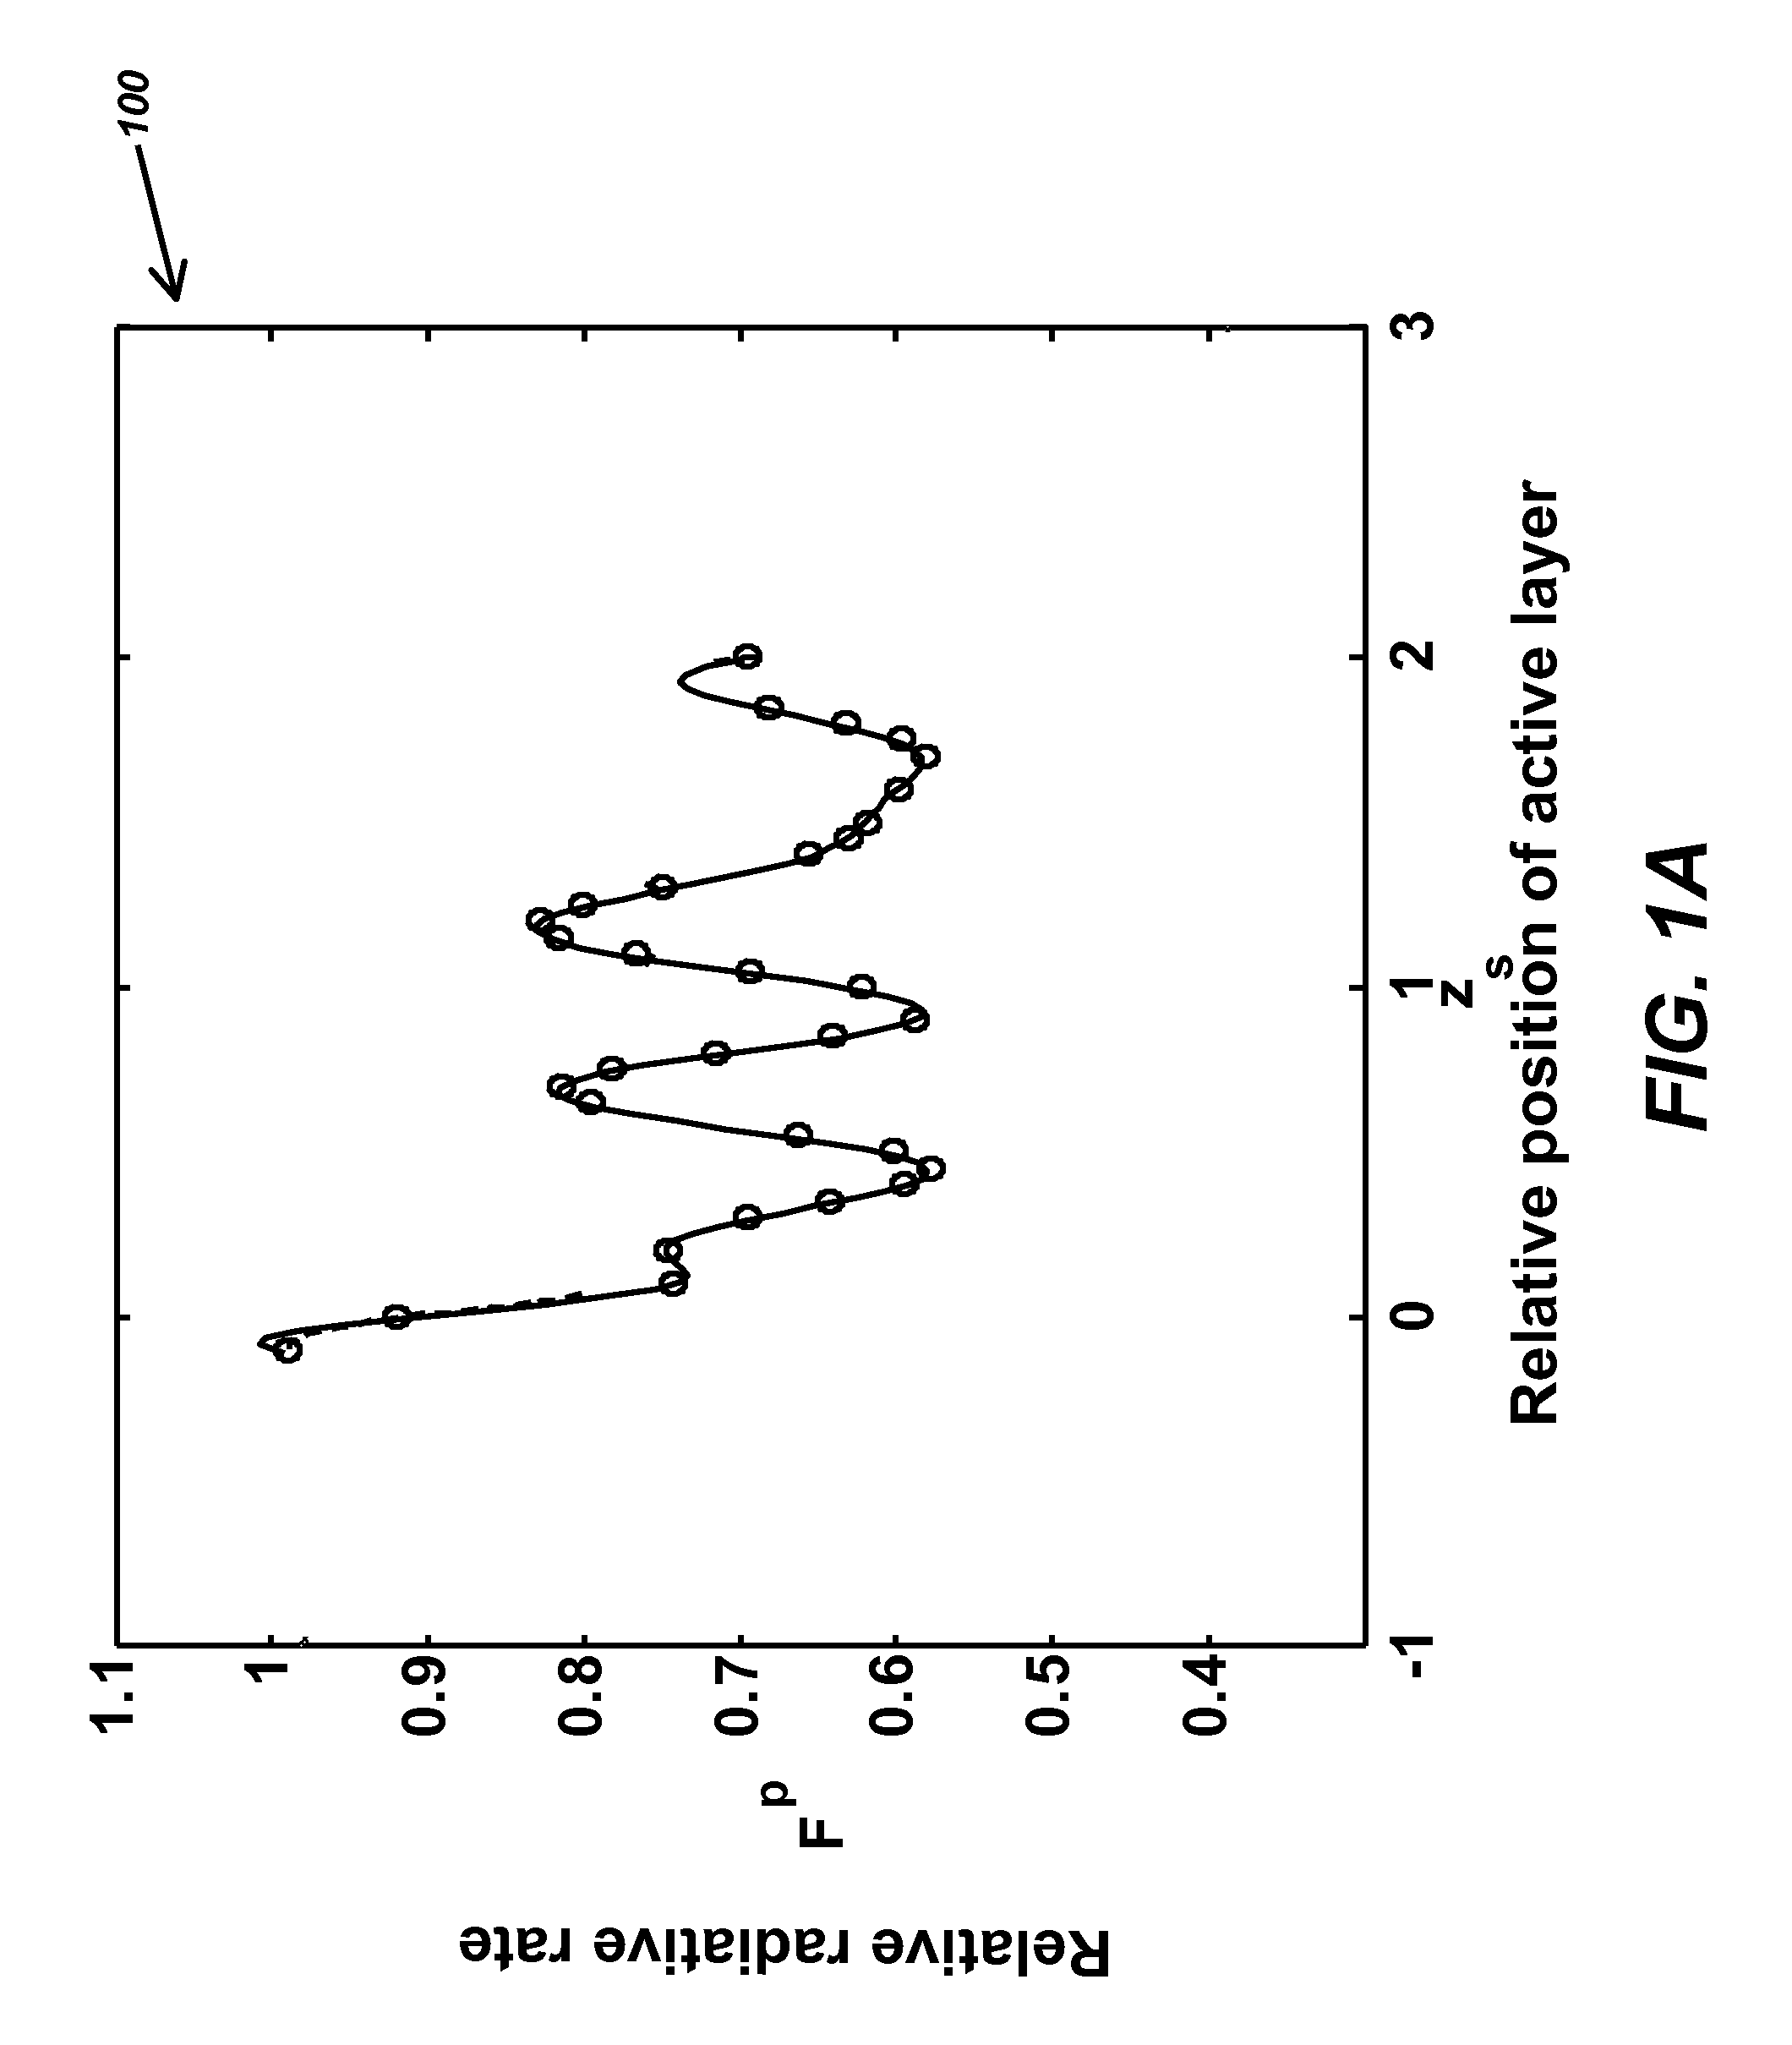 High light extraction efficiency light emitting diode (LED) with emitters within structured materials